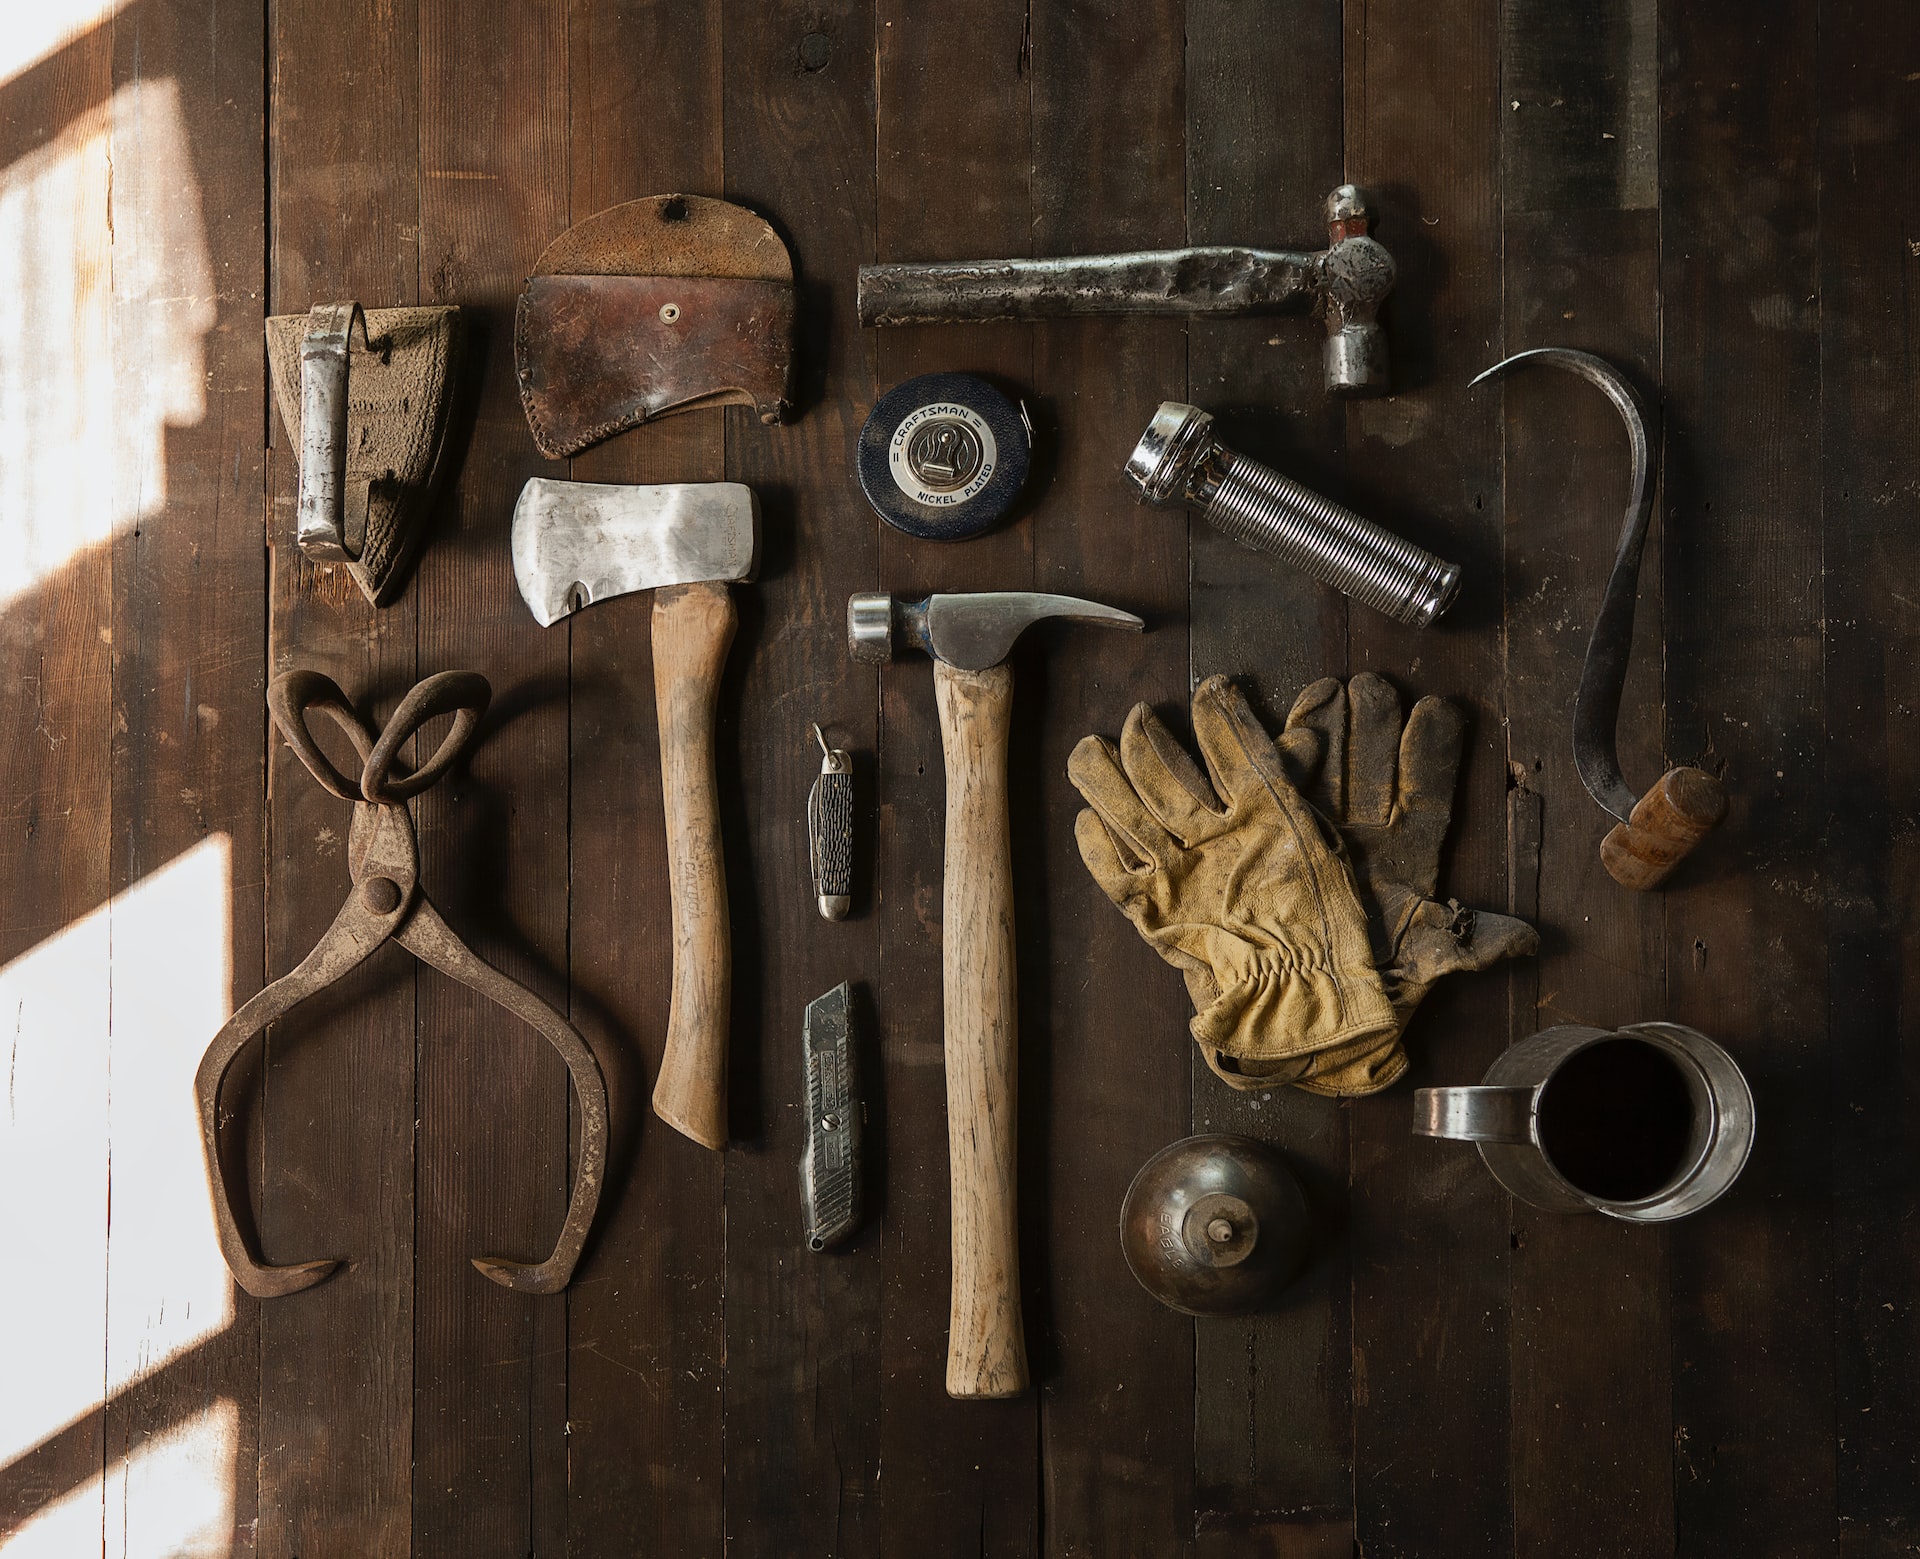 Tools for fixing issues around the house